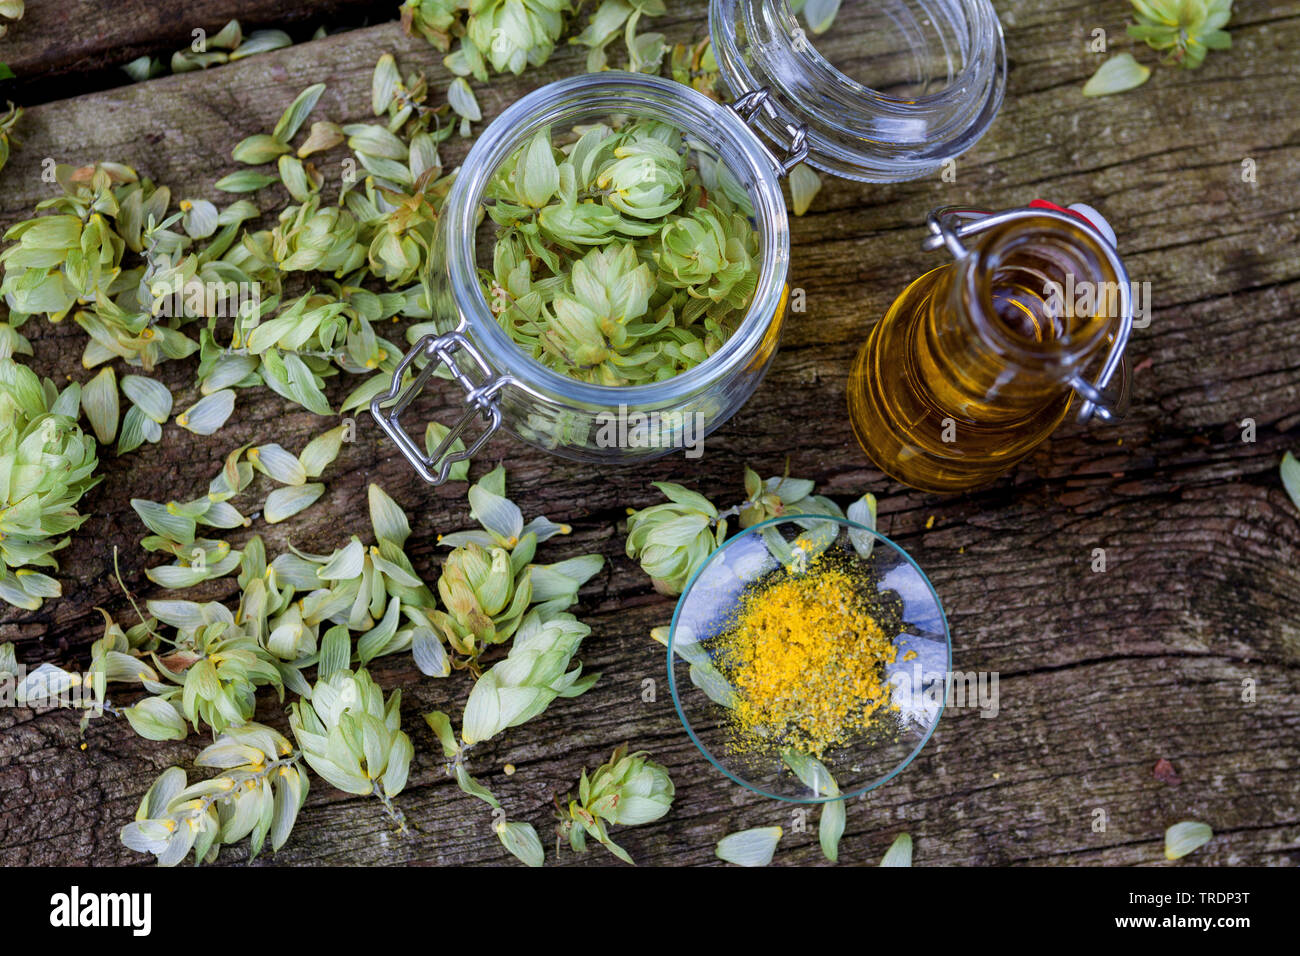 common hop (Humulus lupulus), production of hop oil, Germany Stock Photo